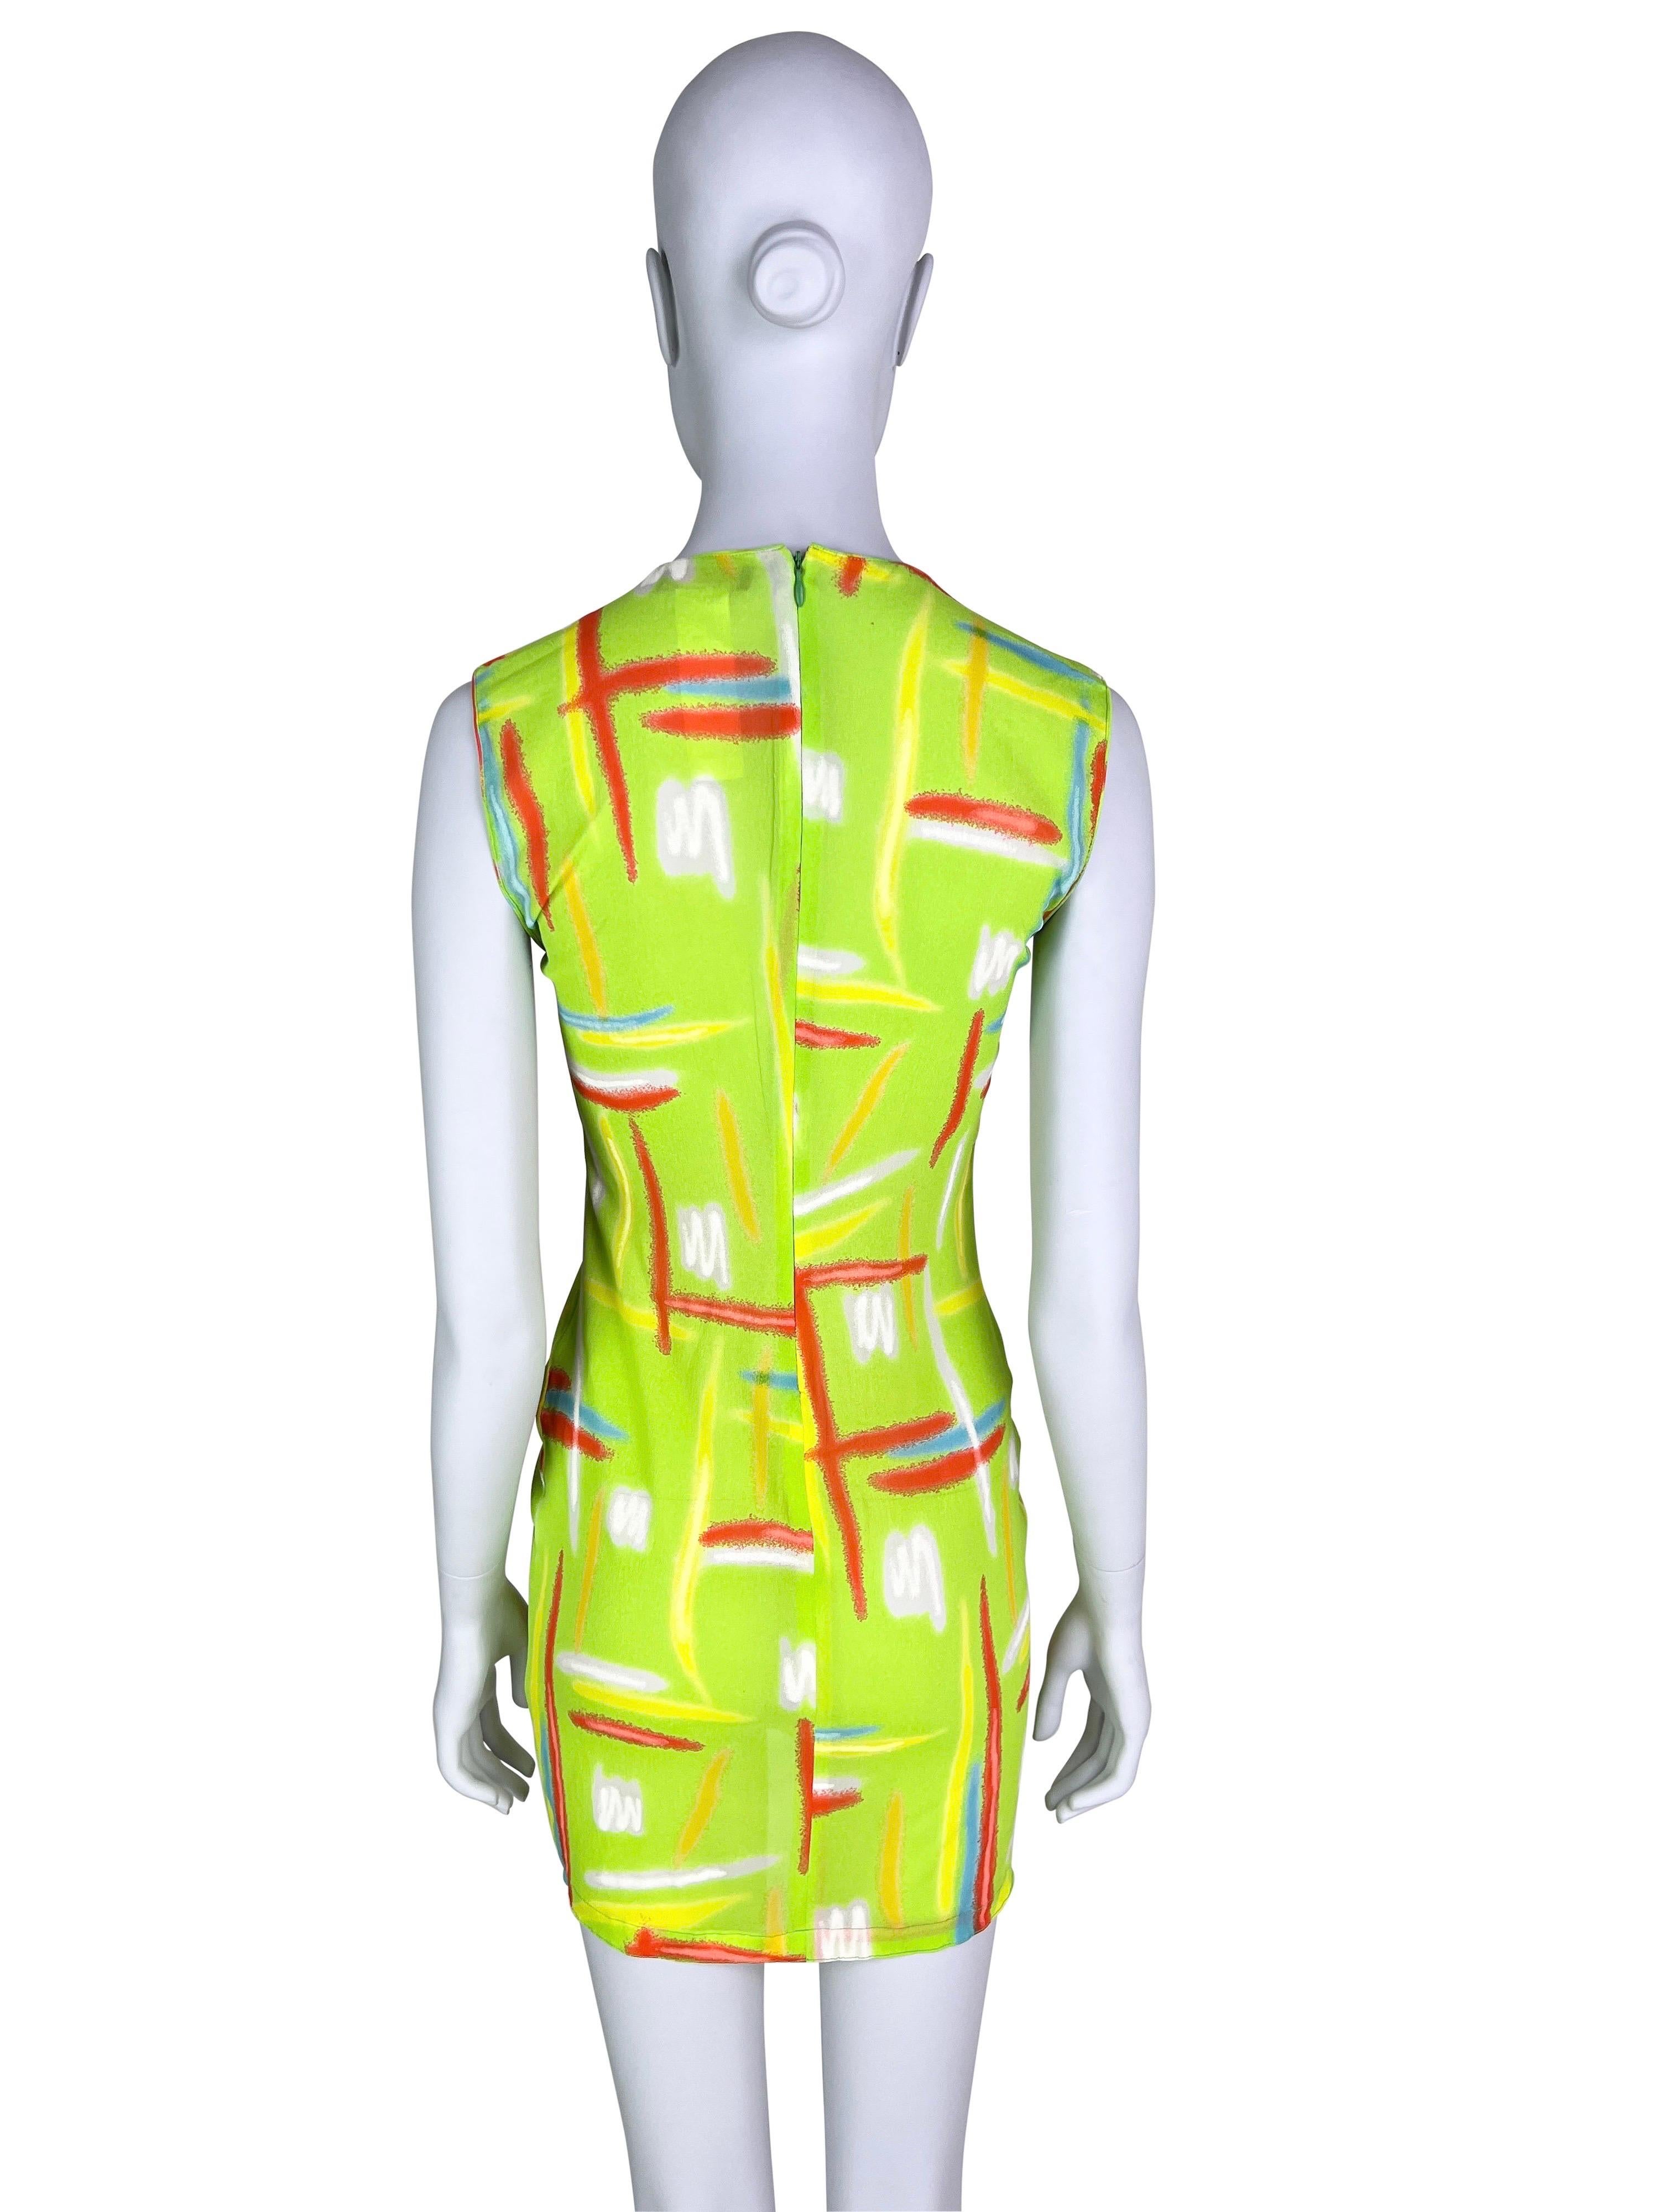 Women's Spring 1996 Gianni Versace Couture Neon Green Highlighter Print Silk Dress For Sale